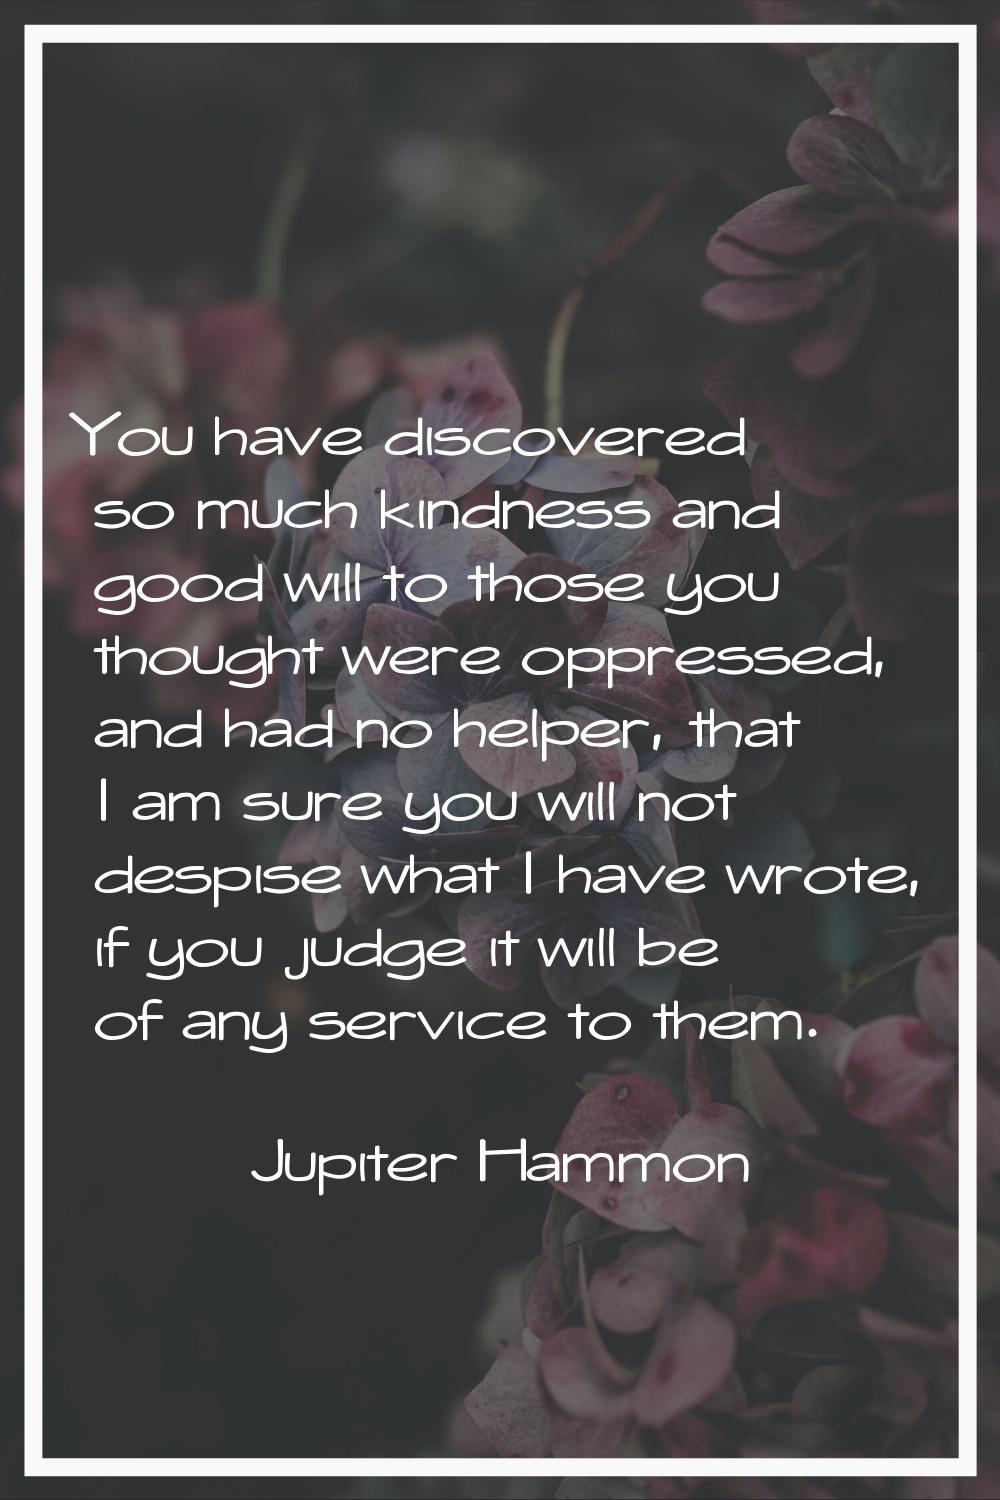 You have discovered so much kindness and good will to those you thought were oppressed, and had no 